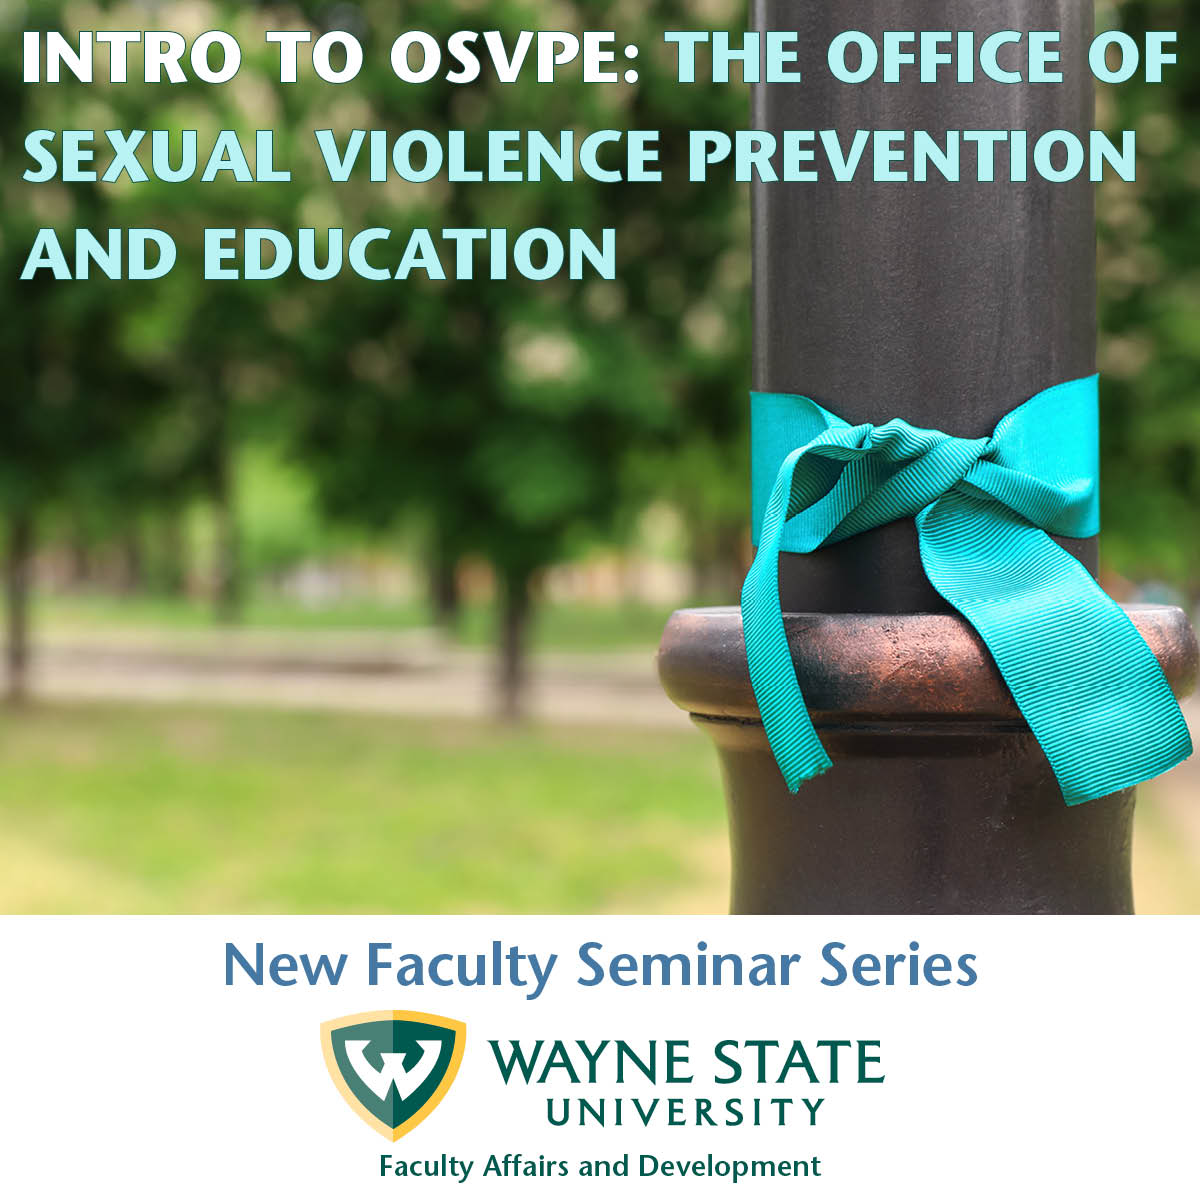 a teal ribbon tied around a light pole in a park, text Intro to OSVPE: The Office of Sexual Violence Prevention and Education